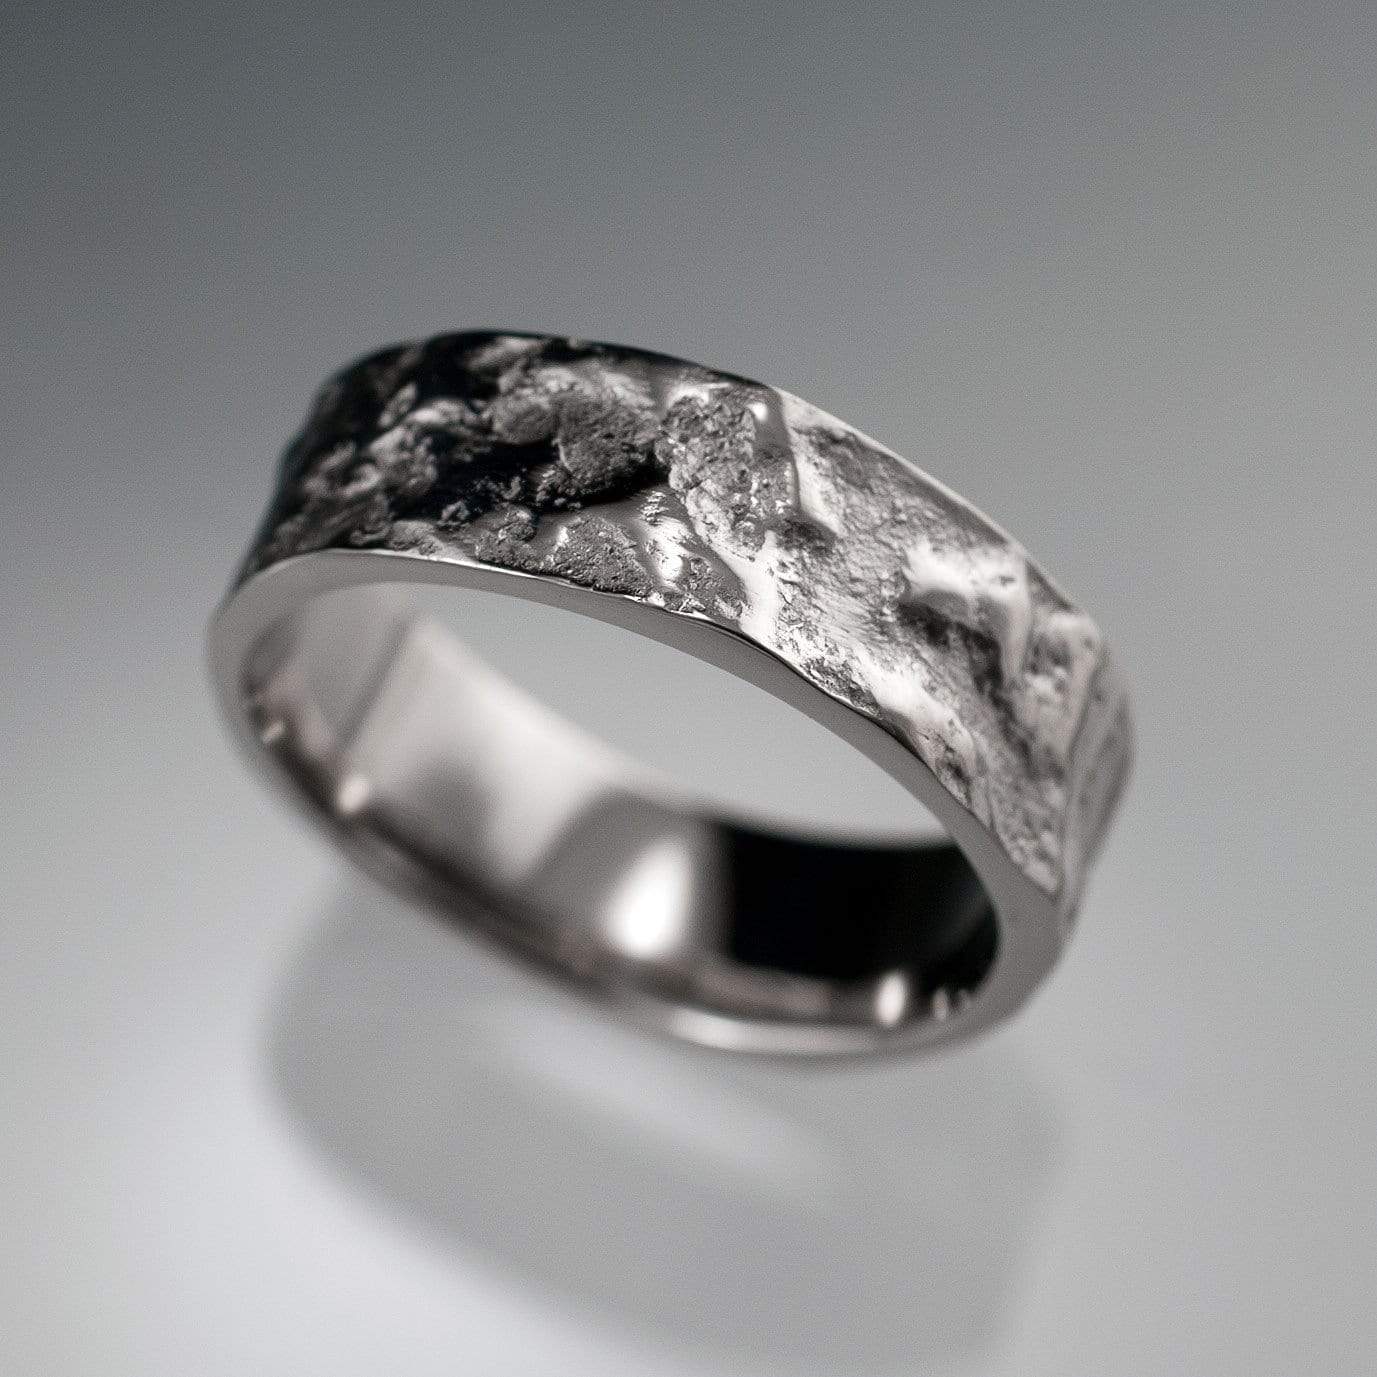 Bush-hammered Marble Texture Wedding Band Ring by Nodeform